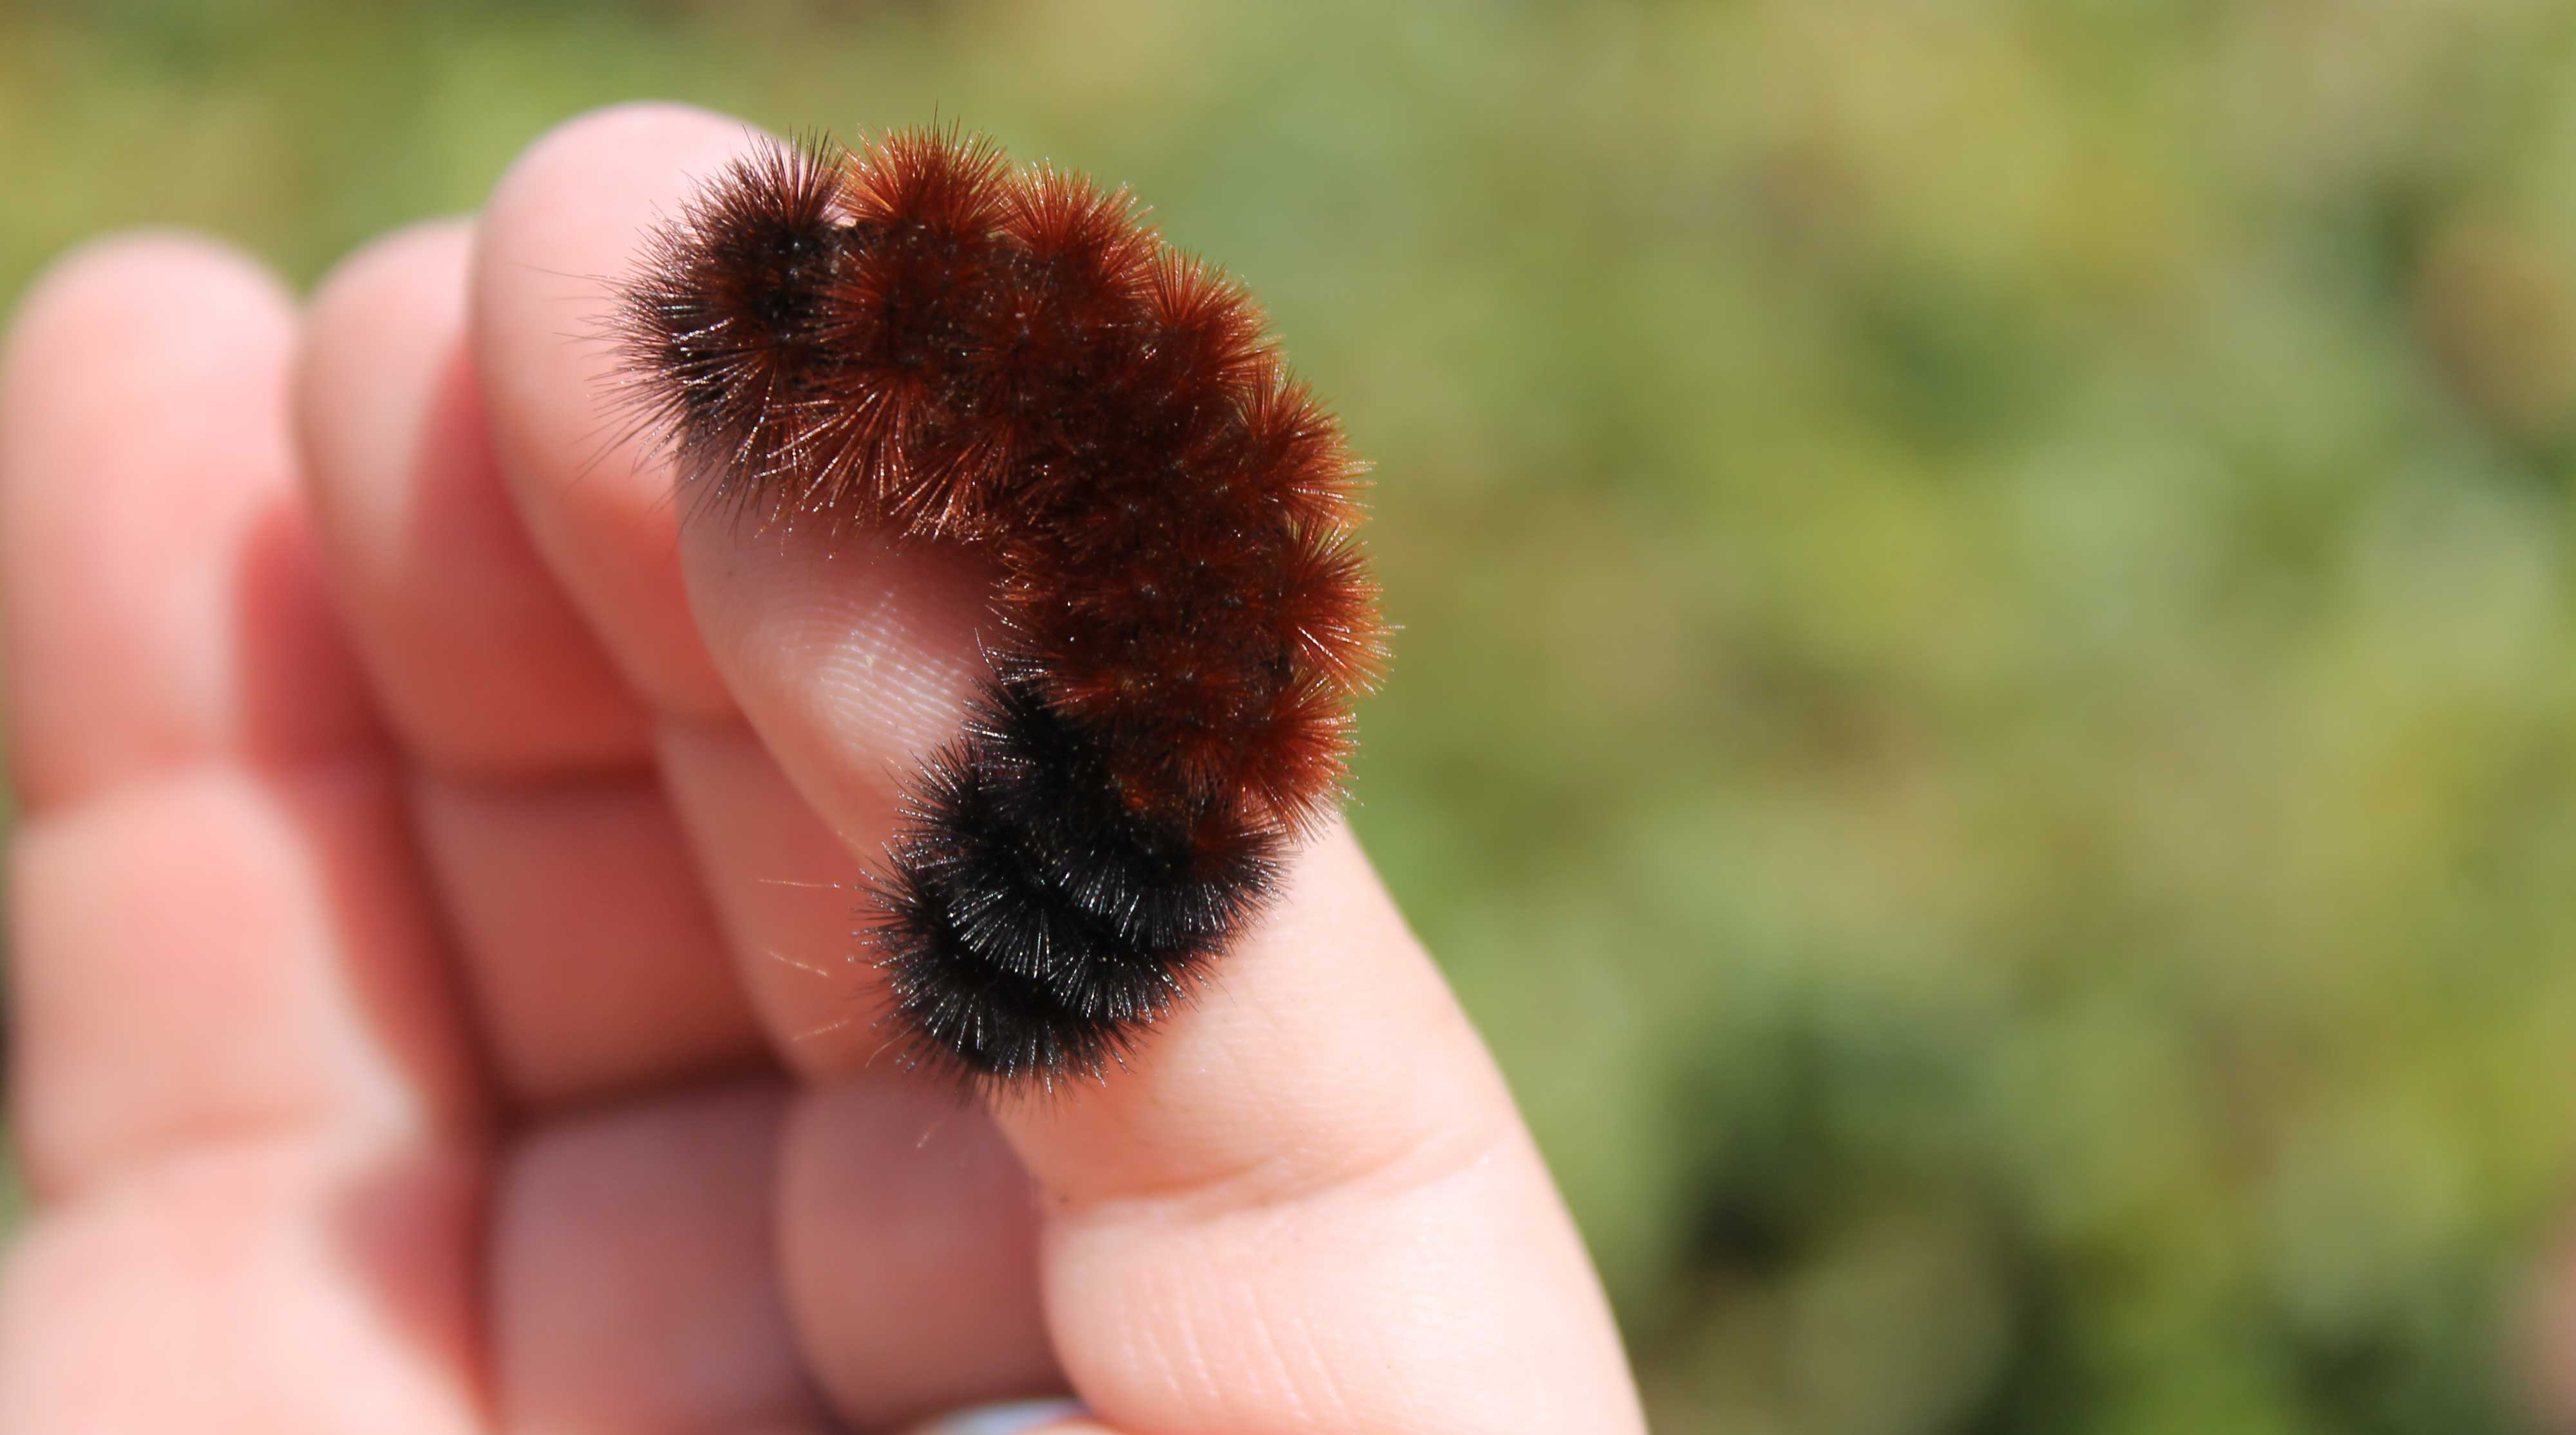 A woolly bear caterpillar crawling on a person's finger.